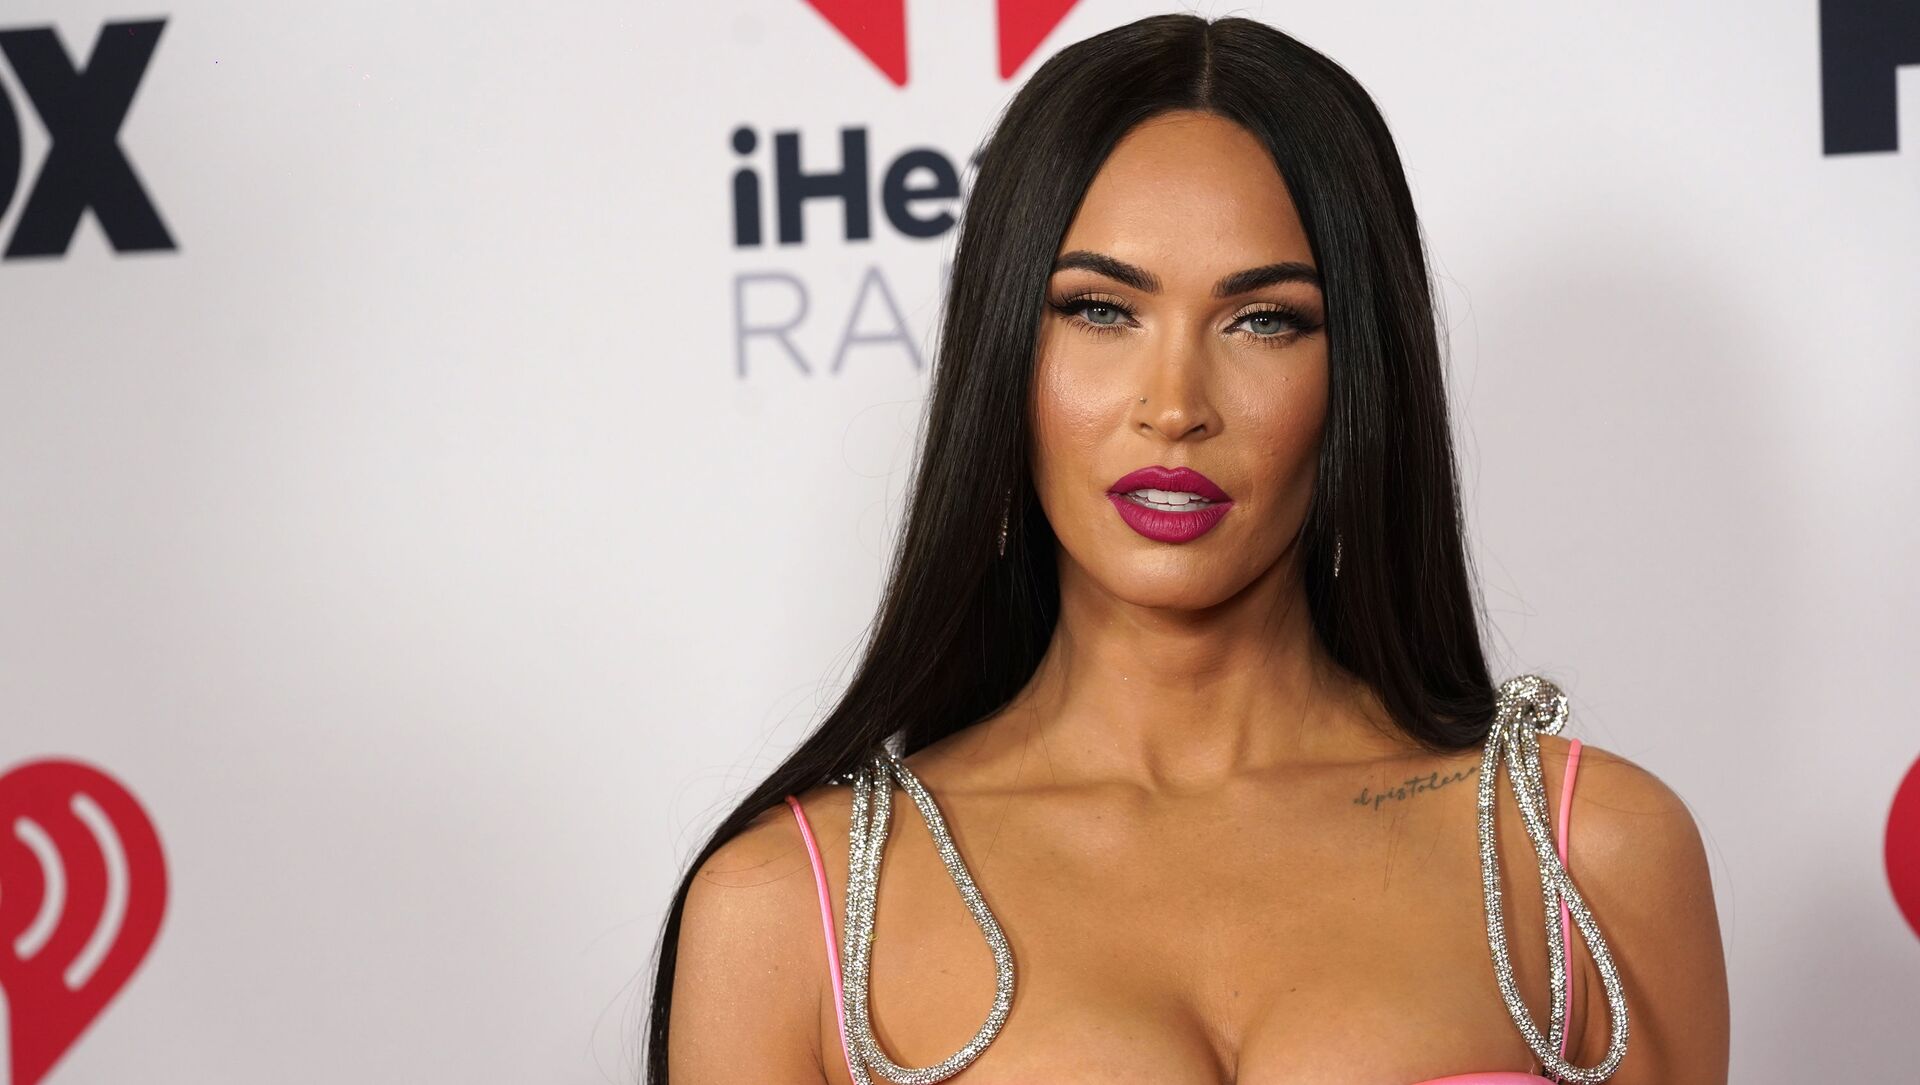 Megan Fox attends the iHeartRadio Music Awards at the Dolby Theatre on Thursday, May 27, 2021, in Los Angeles - Sputnik International, 1920, 15.07.2021